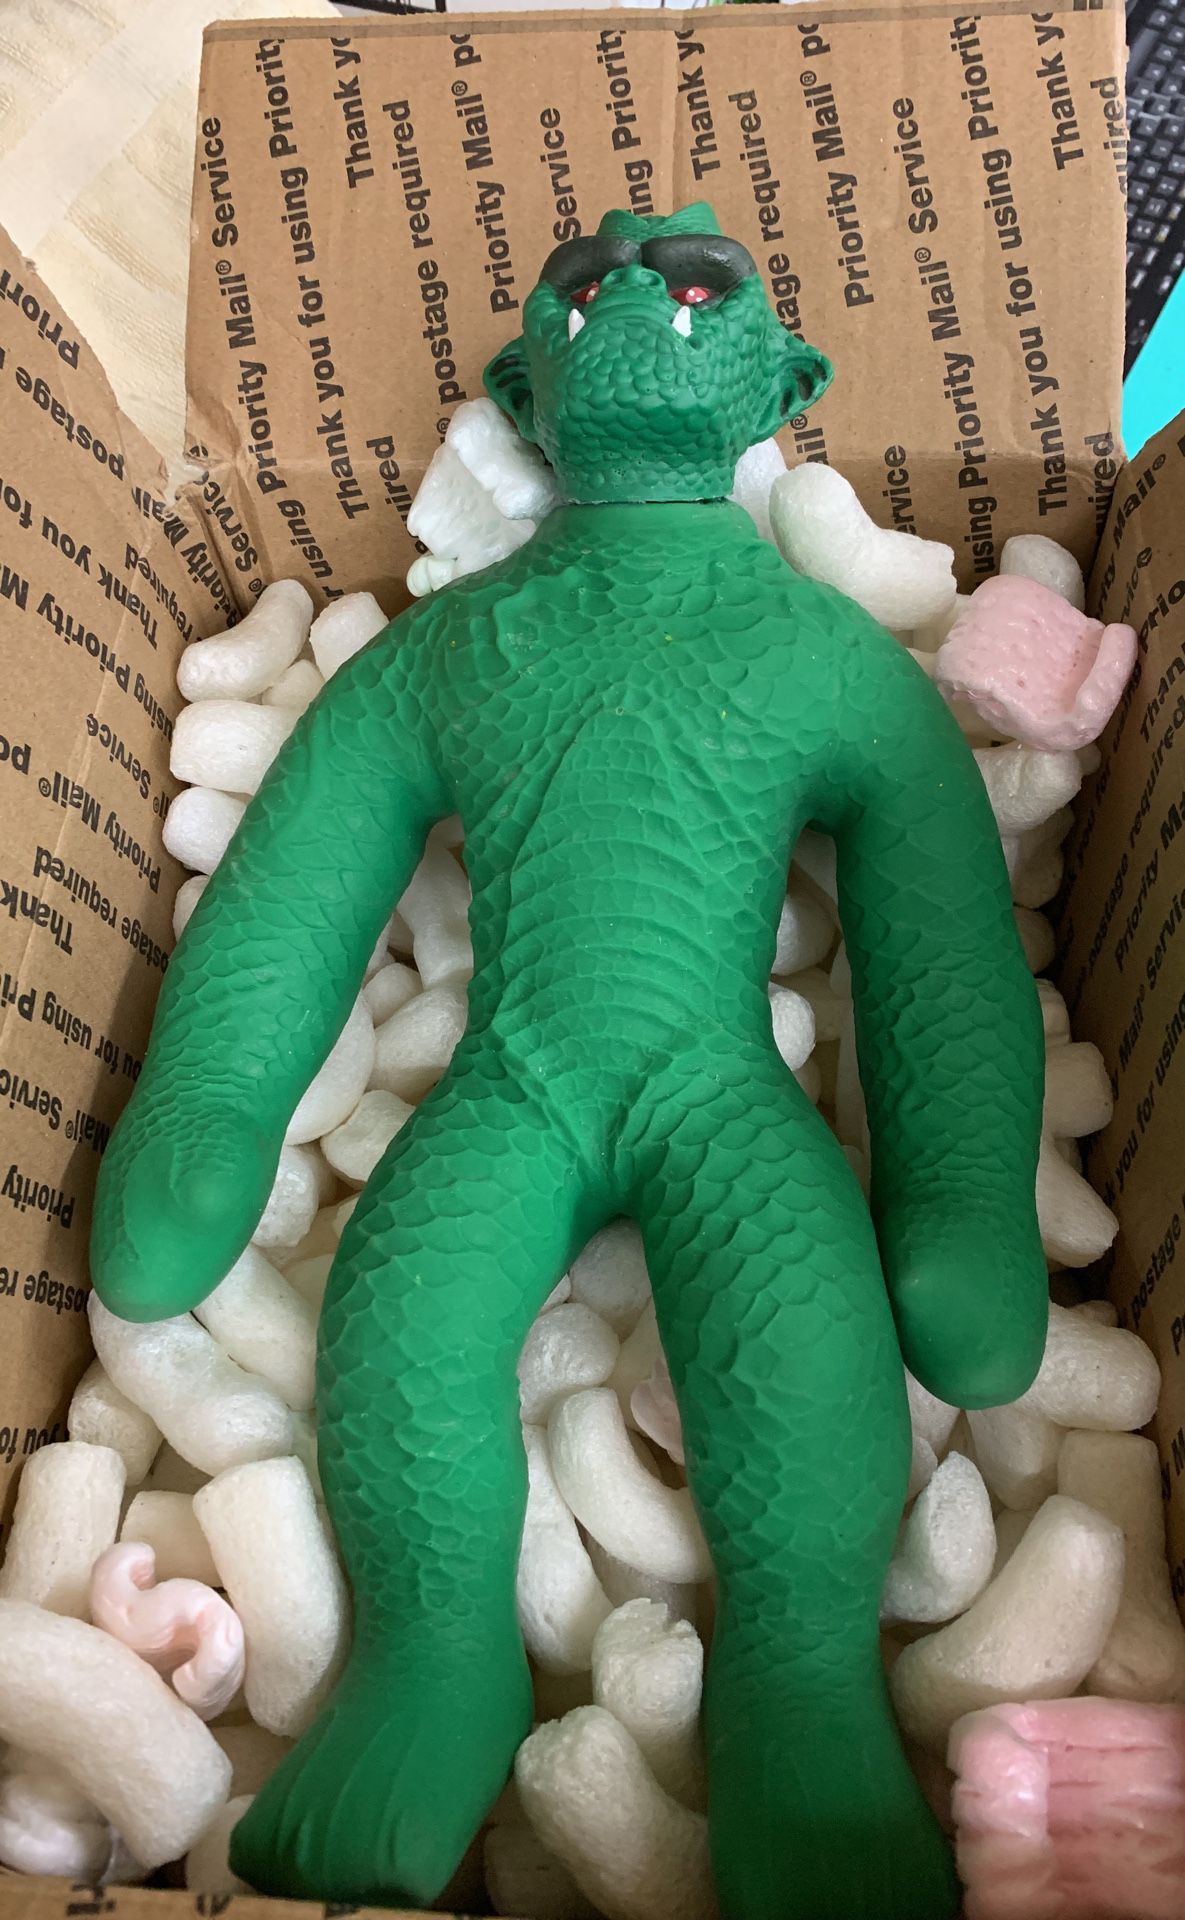 Armstrong stretch green monster New Rare!!!!!